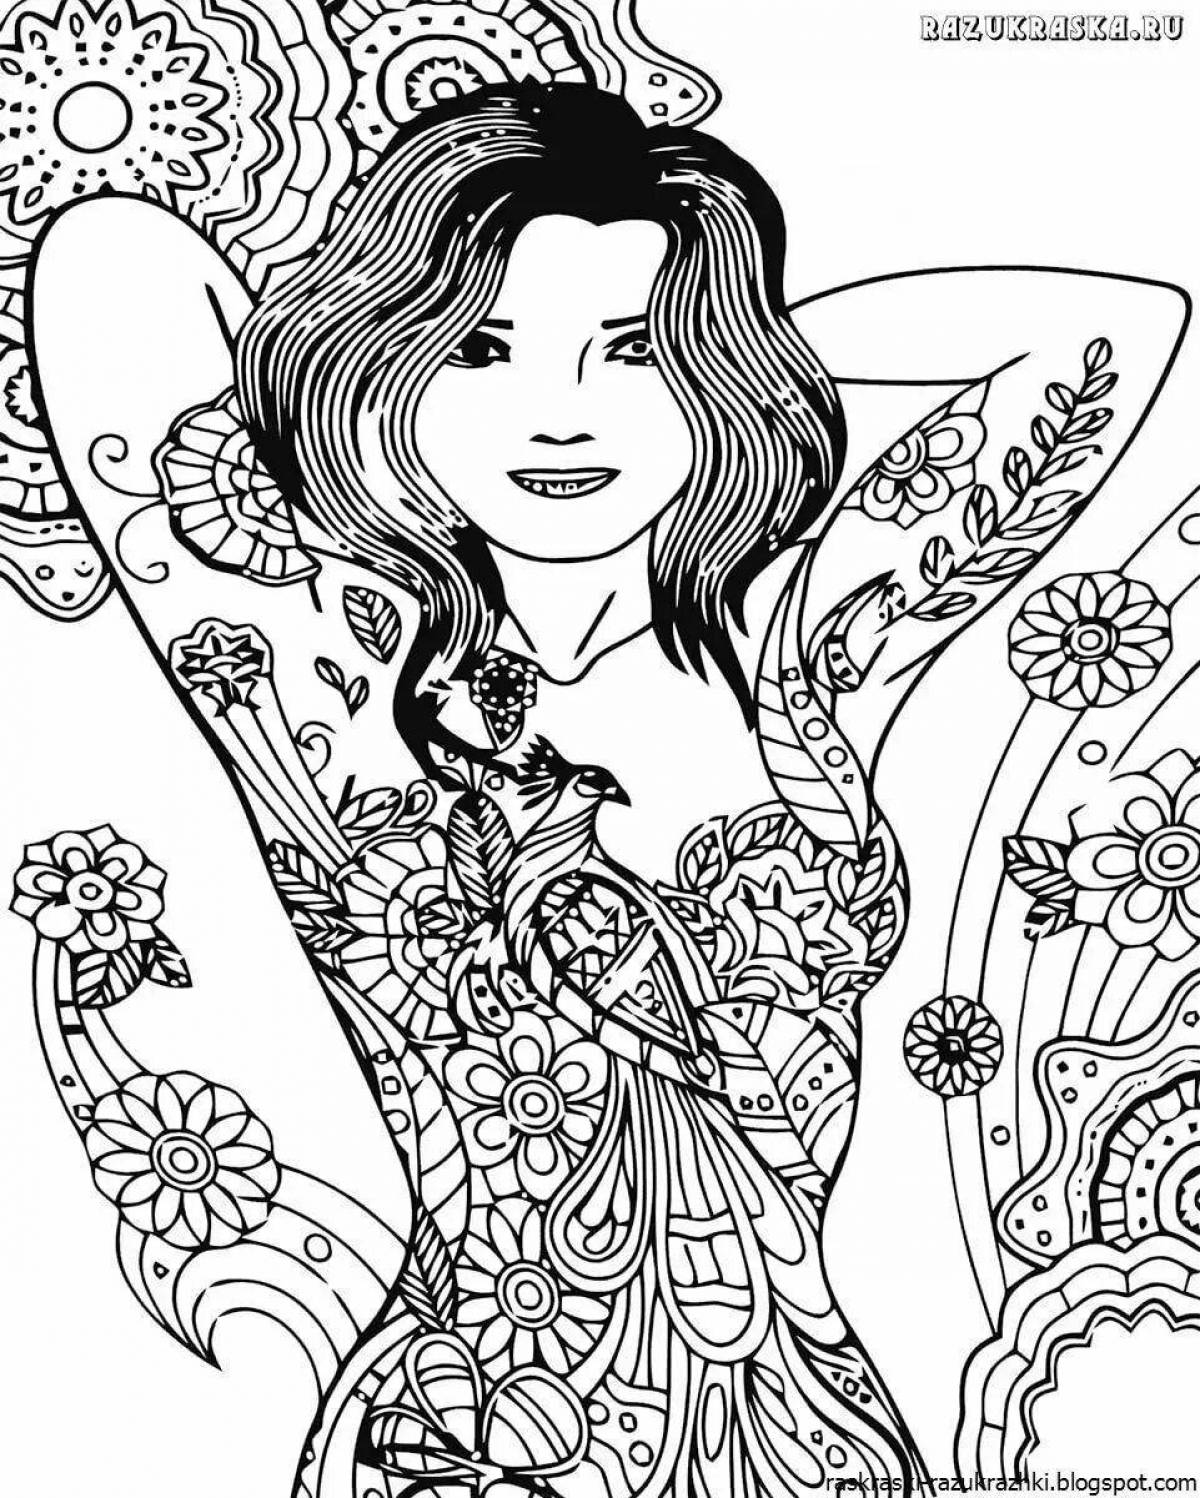 Colorific antistress coloring book for girls 13 years old